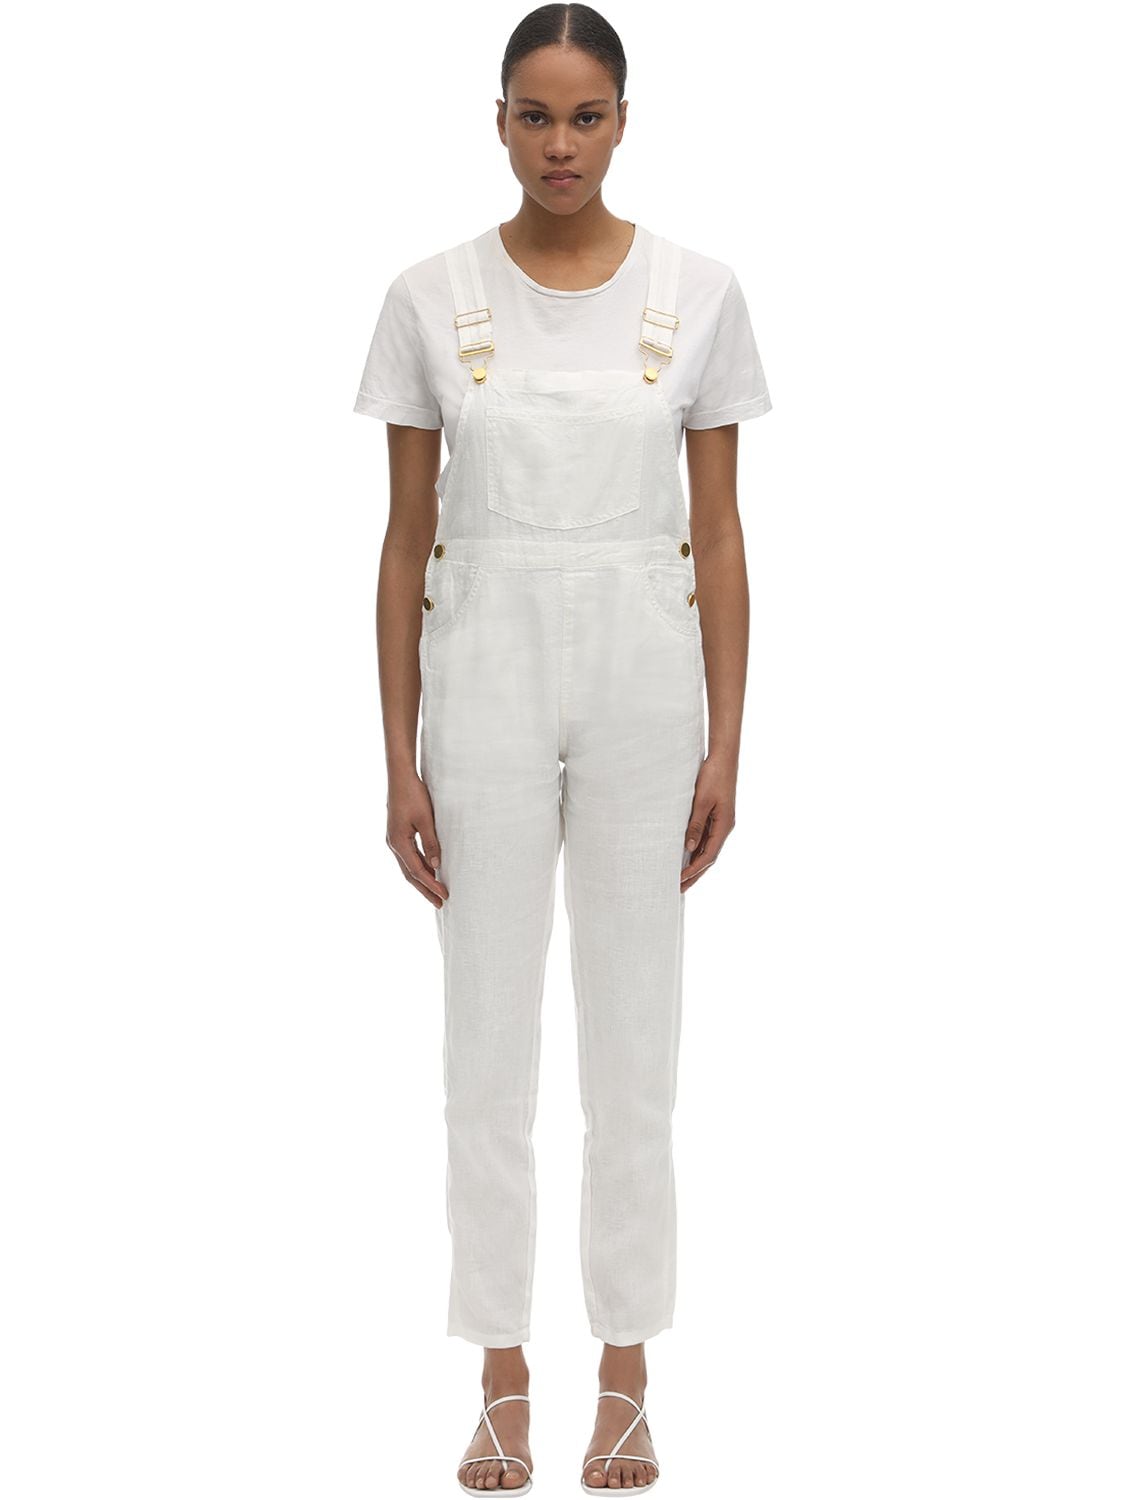 WEWOREWHAT BASIC LINEN dungarees,71ICEB003-MTAW0